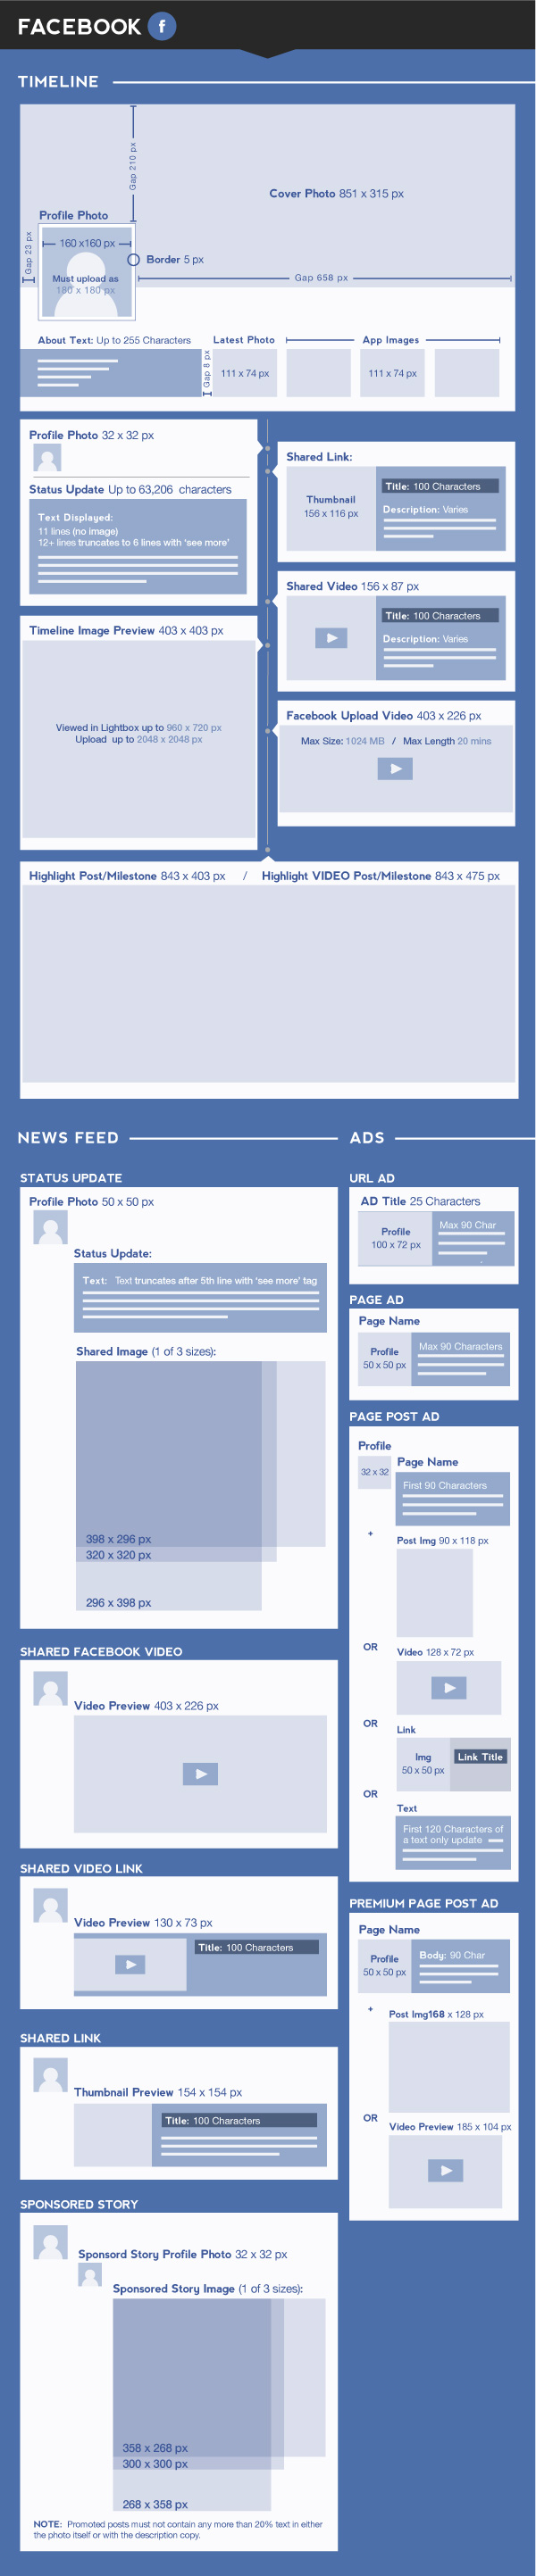 Facebook - A Complete Social Media Image Size Guide [INFOGRAPHIC] - PSW Group Blog